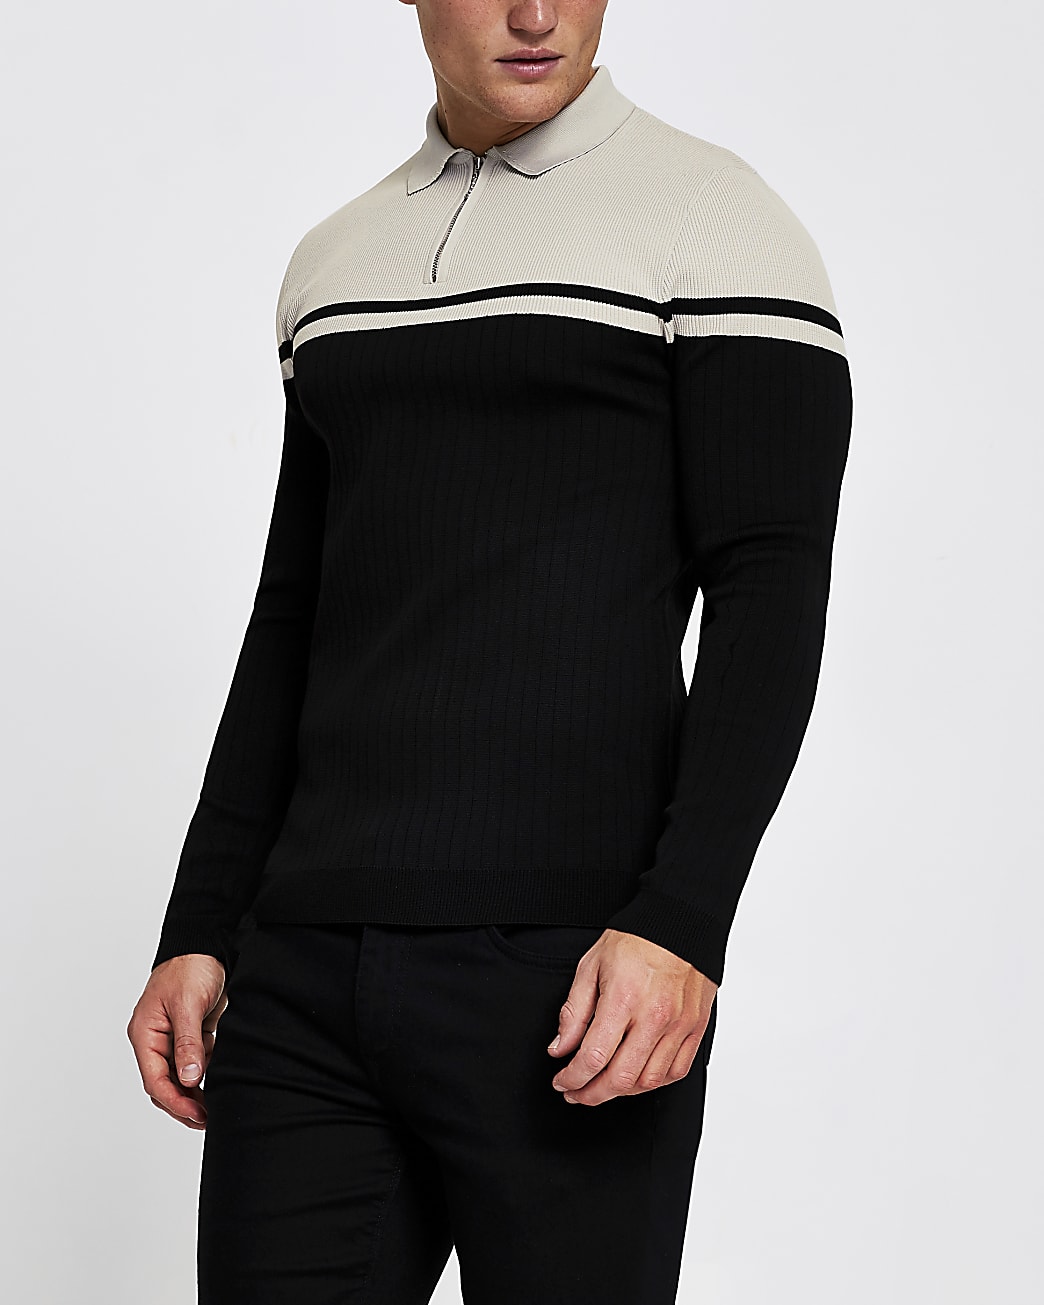 River Island Mens Black Blocked Muscle Fit Knitted Polo Shirt